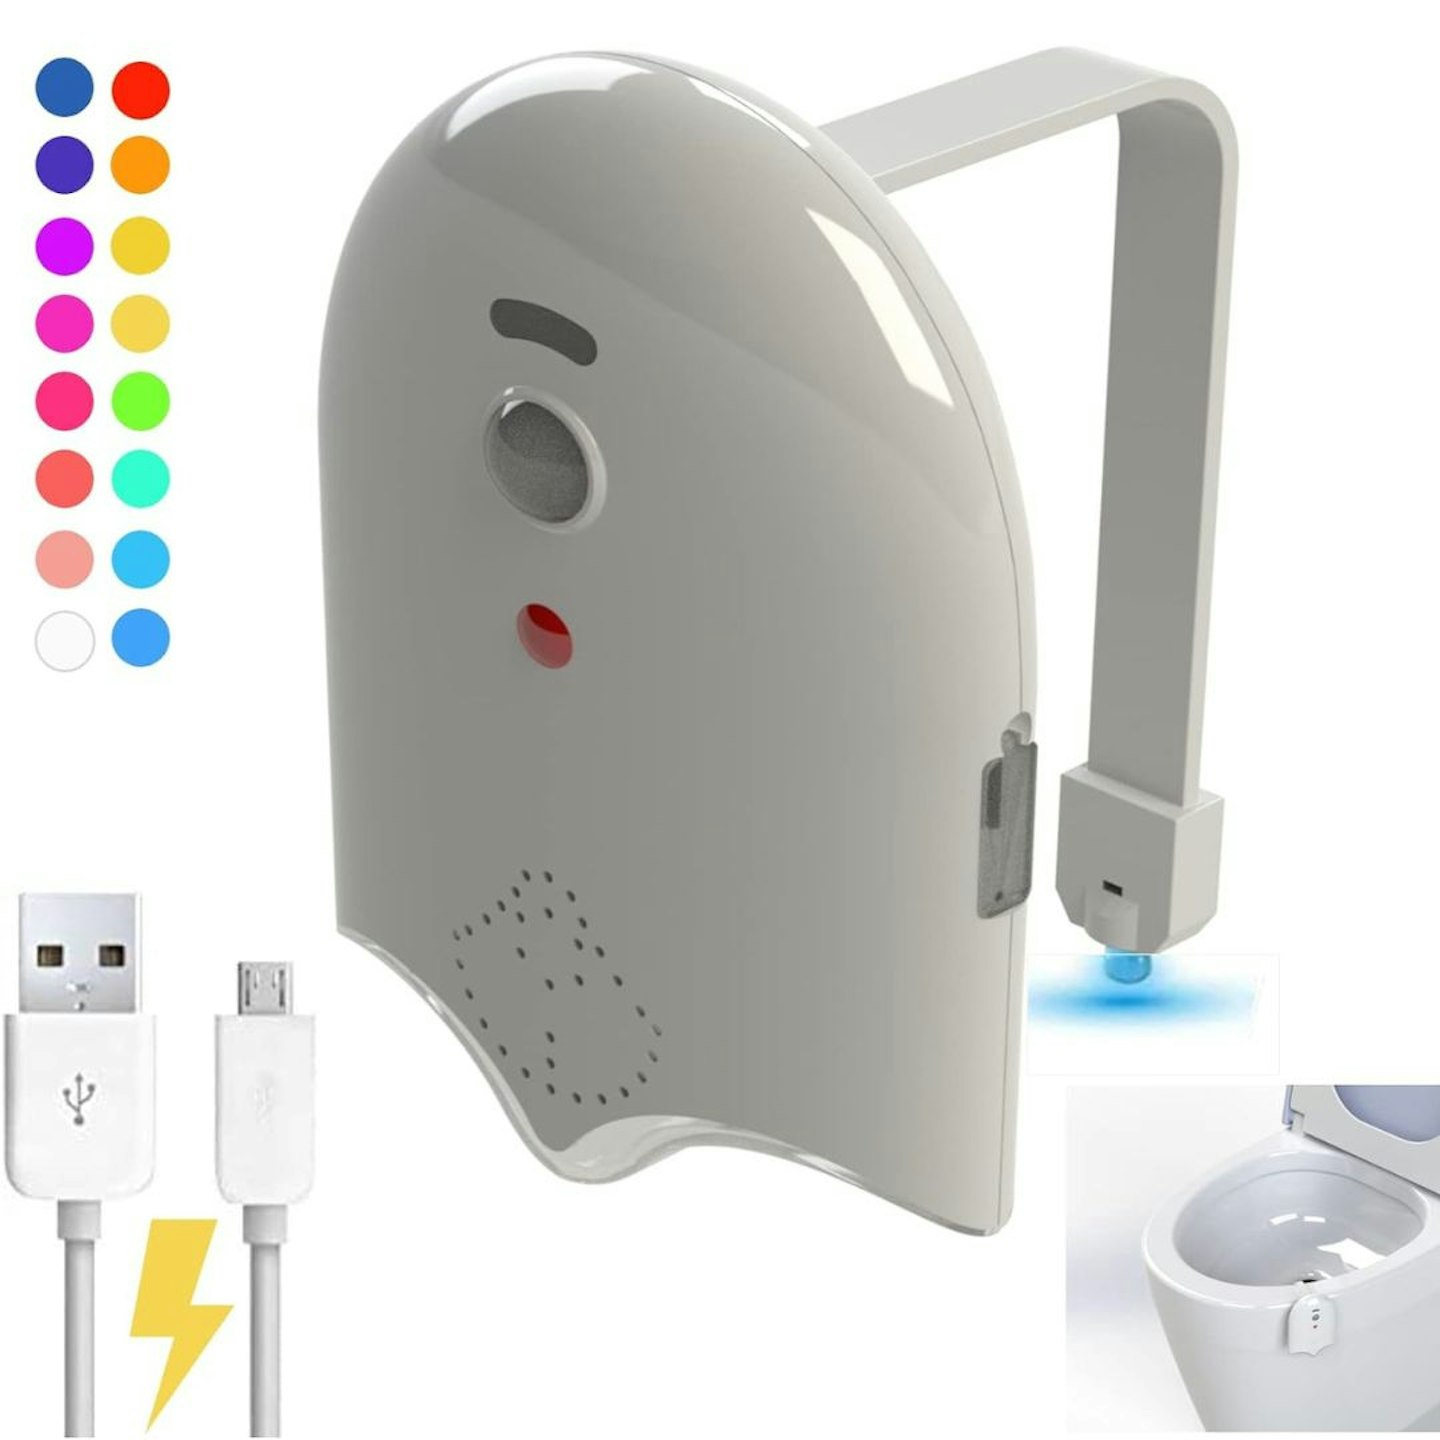 ProductiveDsign Rechargeable Toilet Bowl Night Light